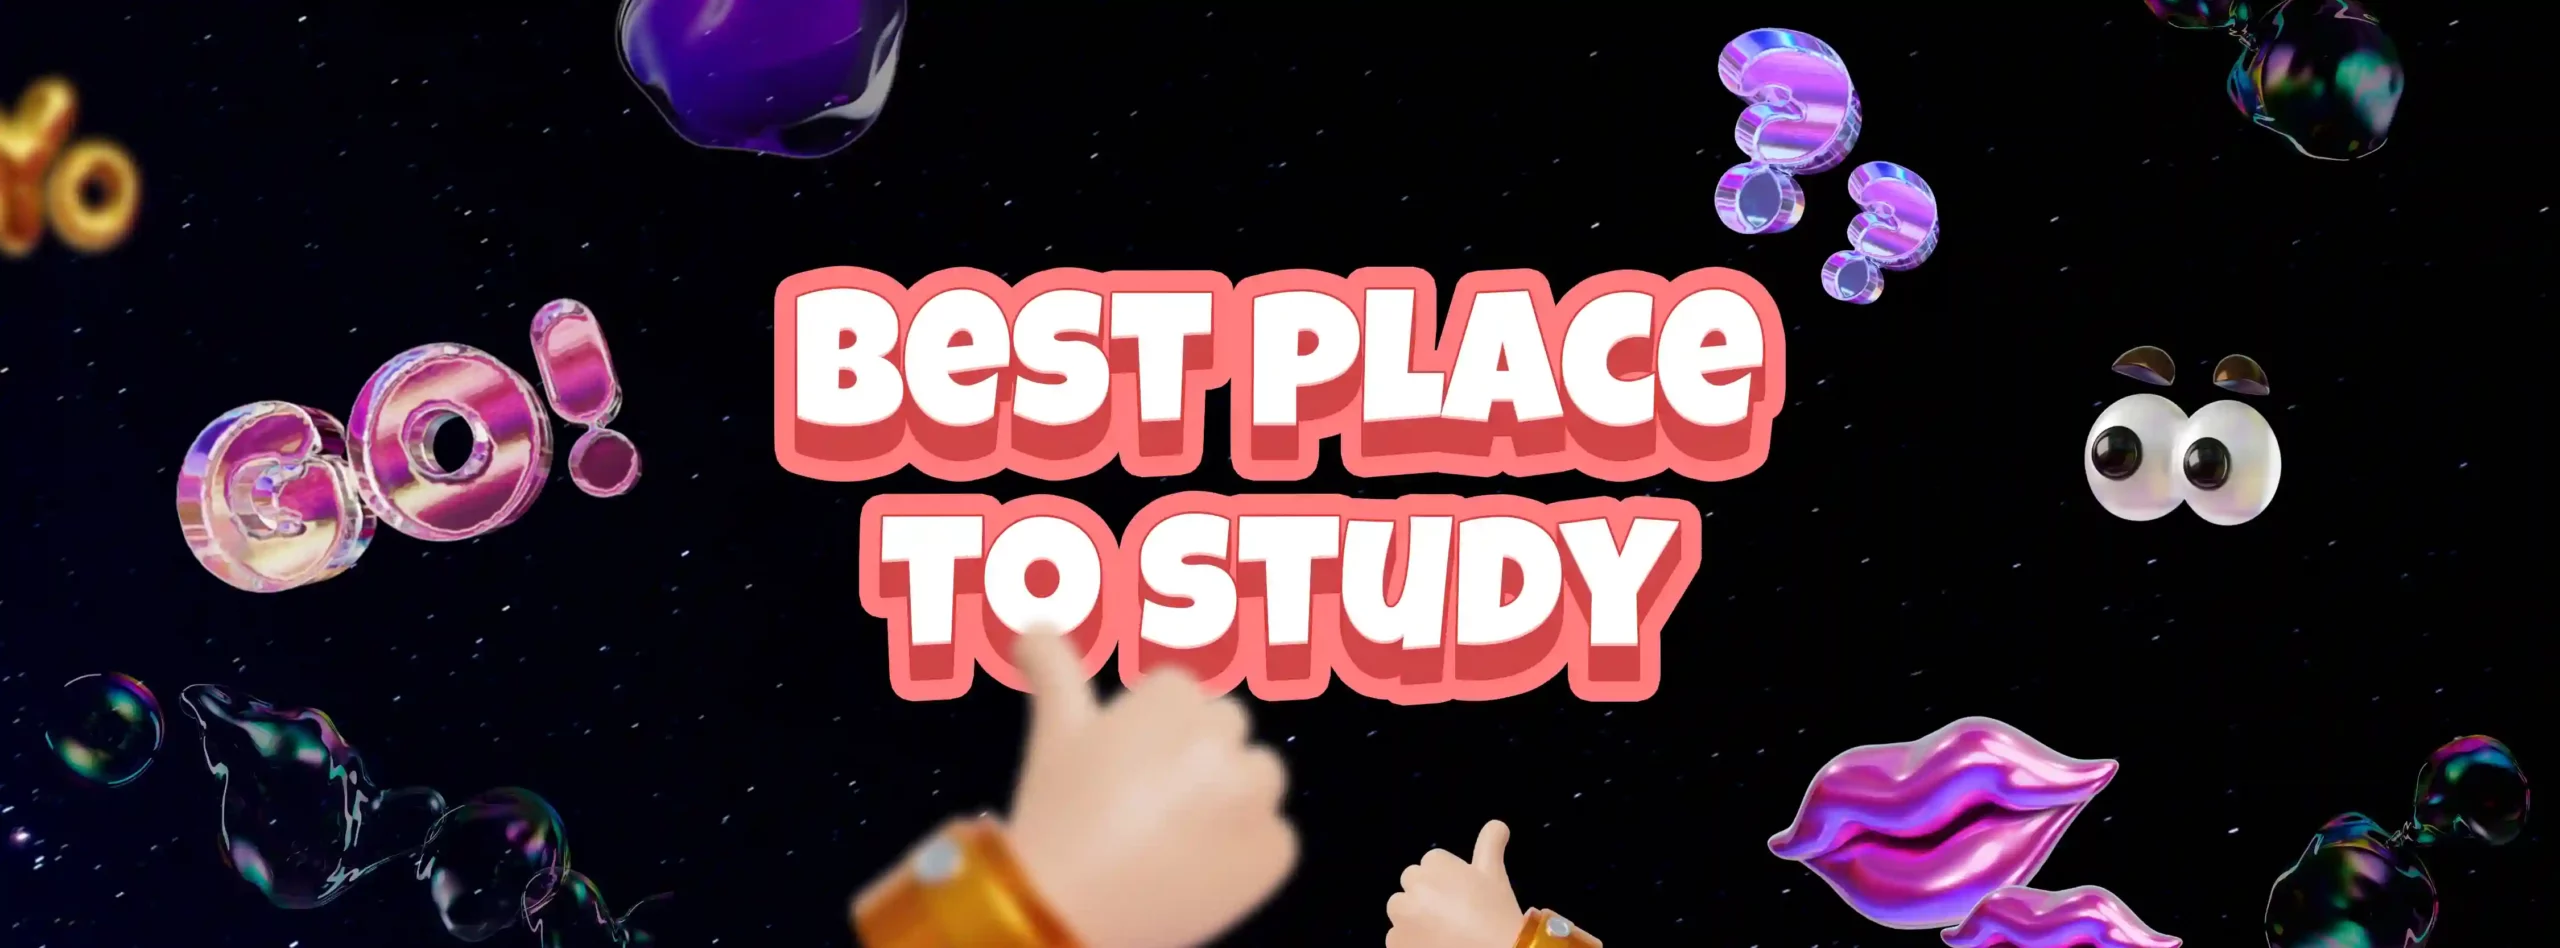 best place to study